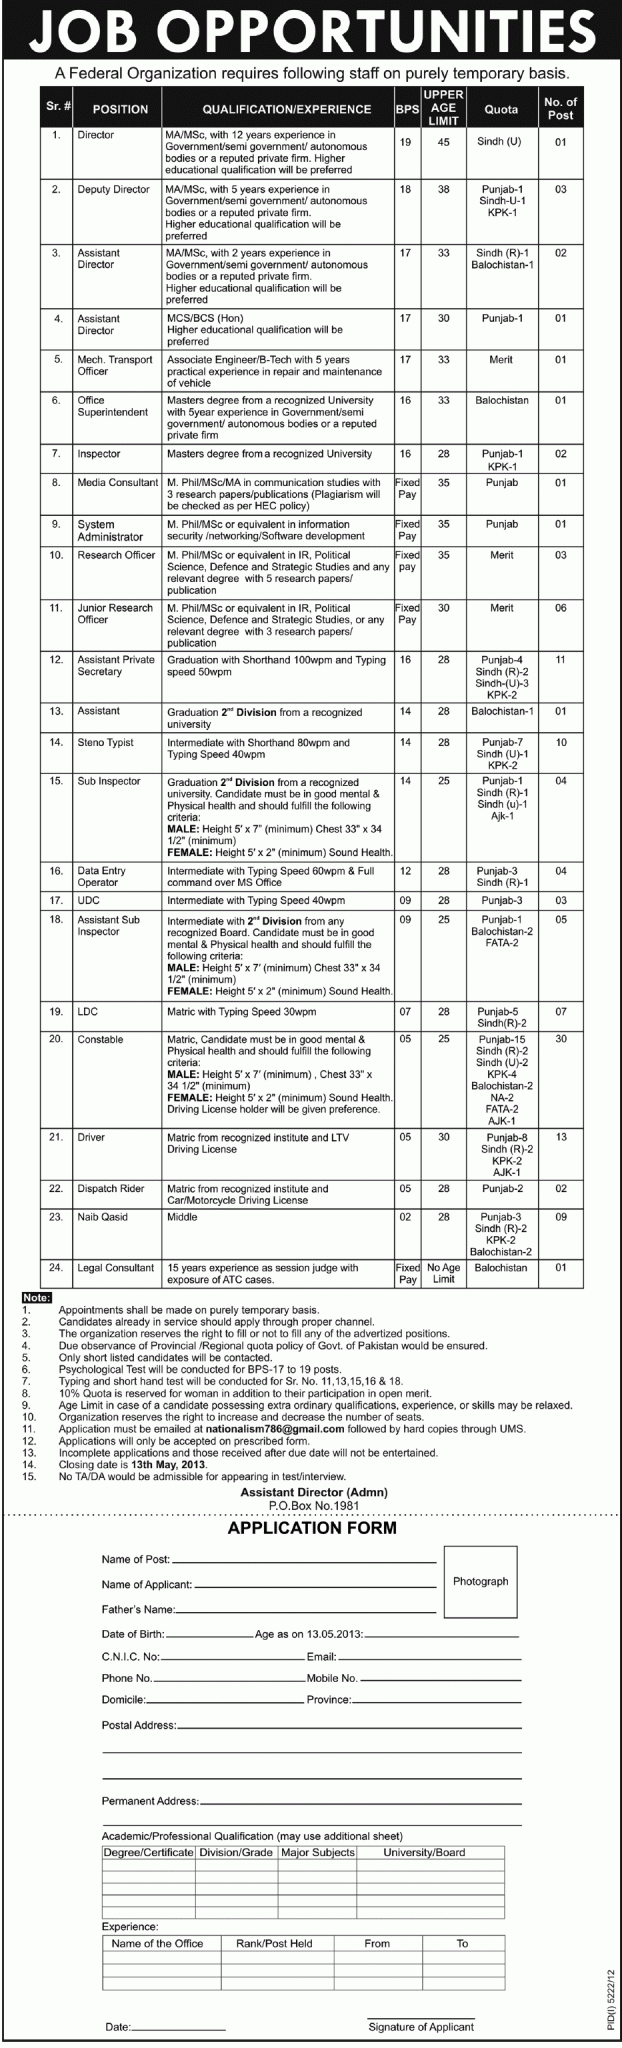 Jobs for Directors, Legal Consultant & Assistant in Federal Organization, Islamabad